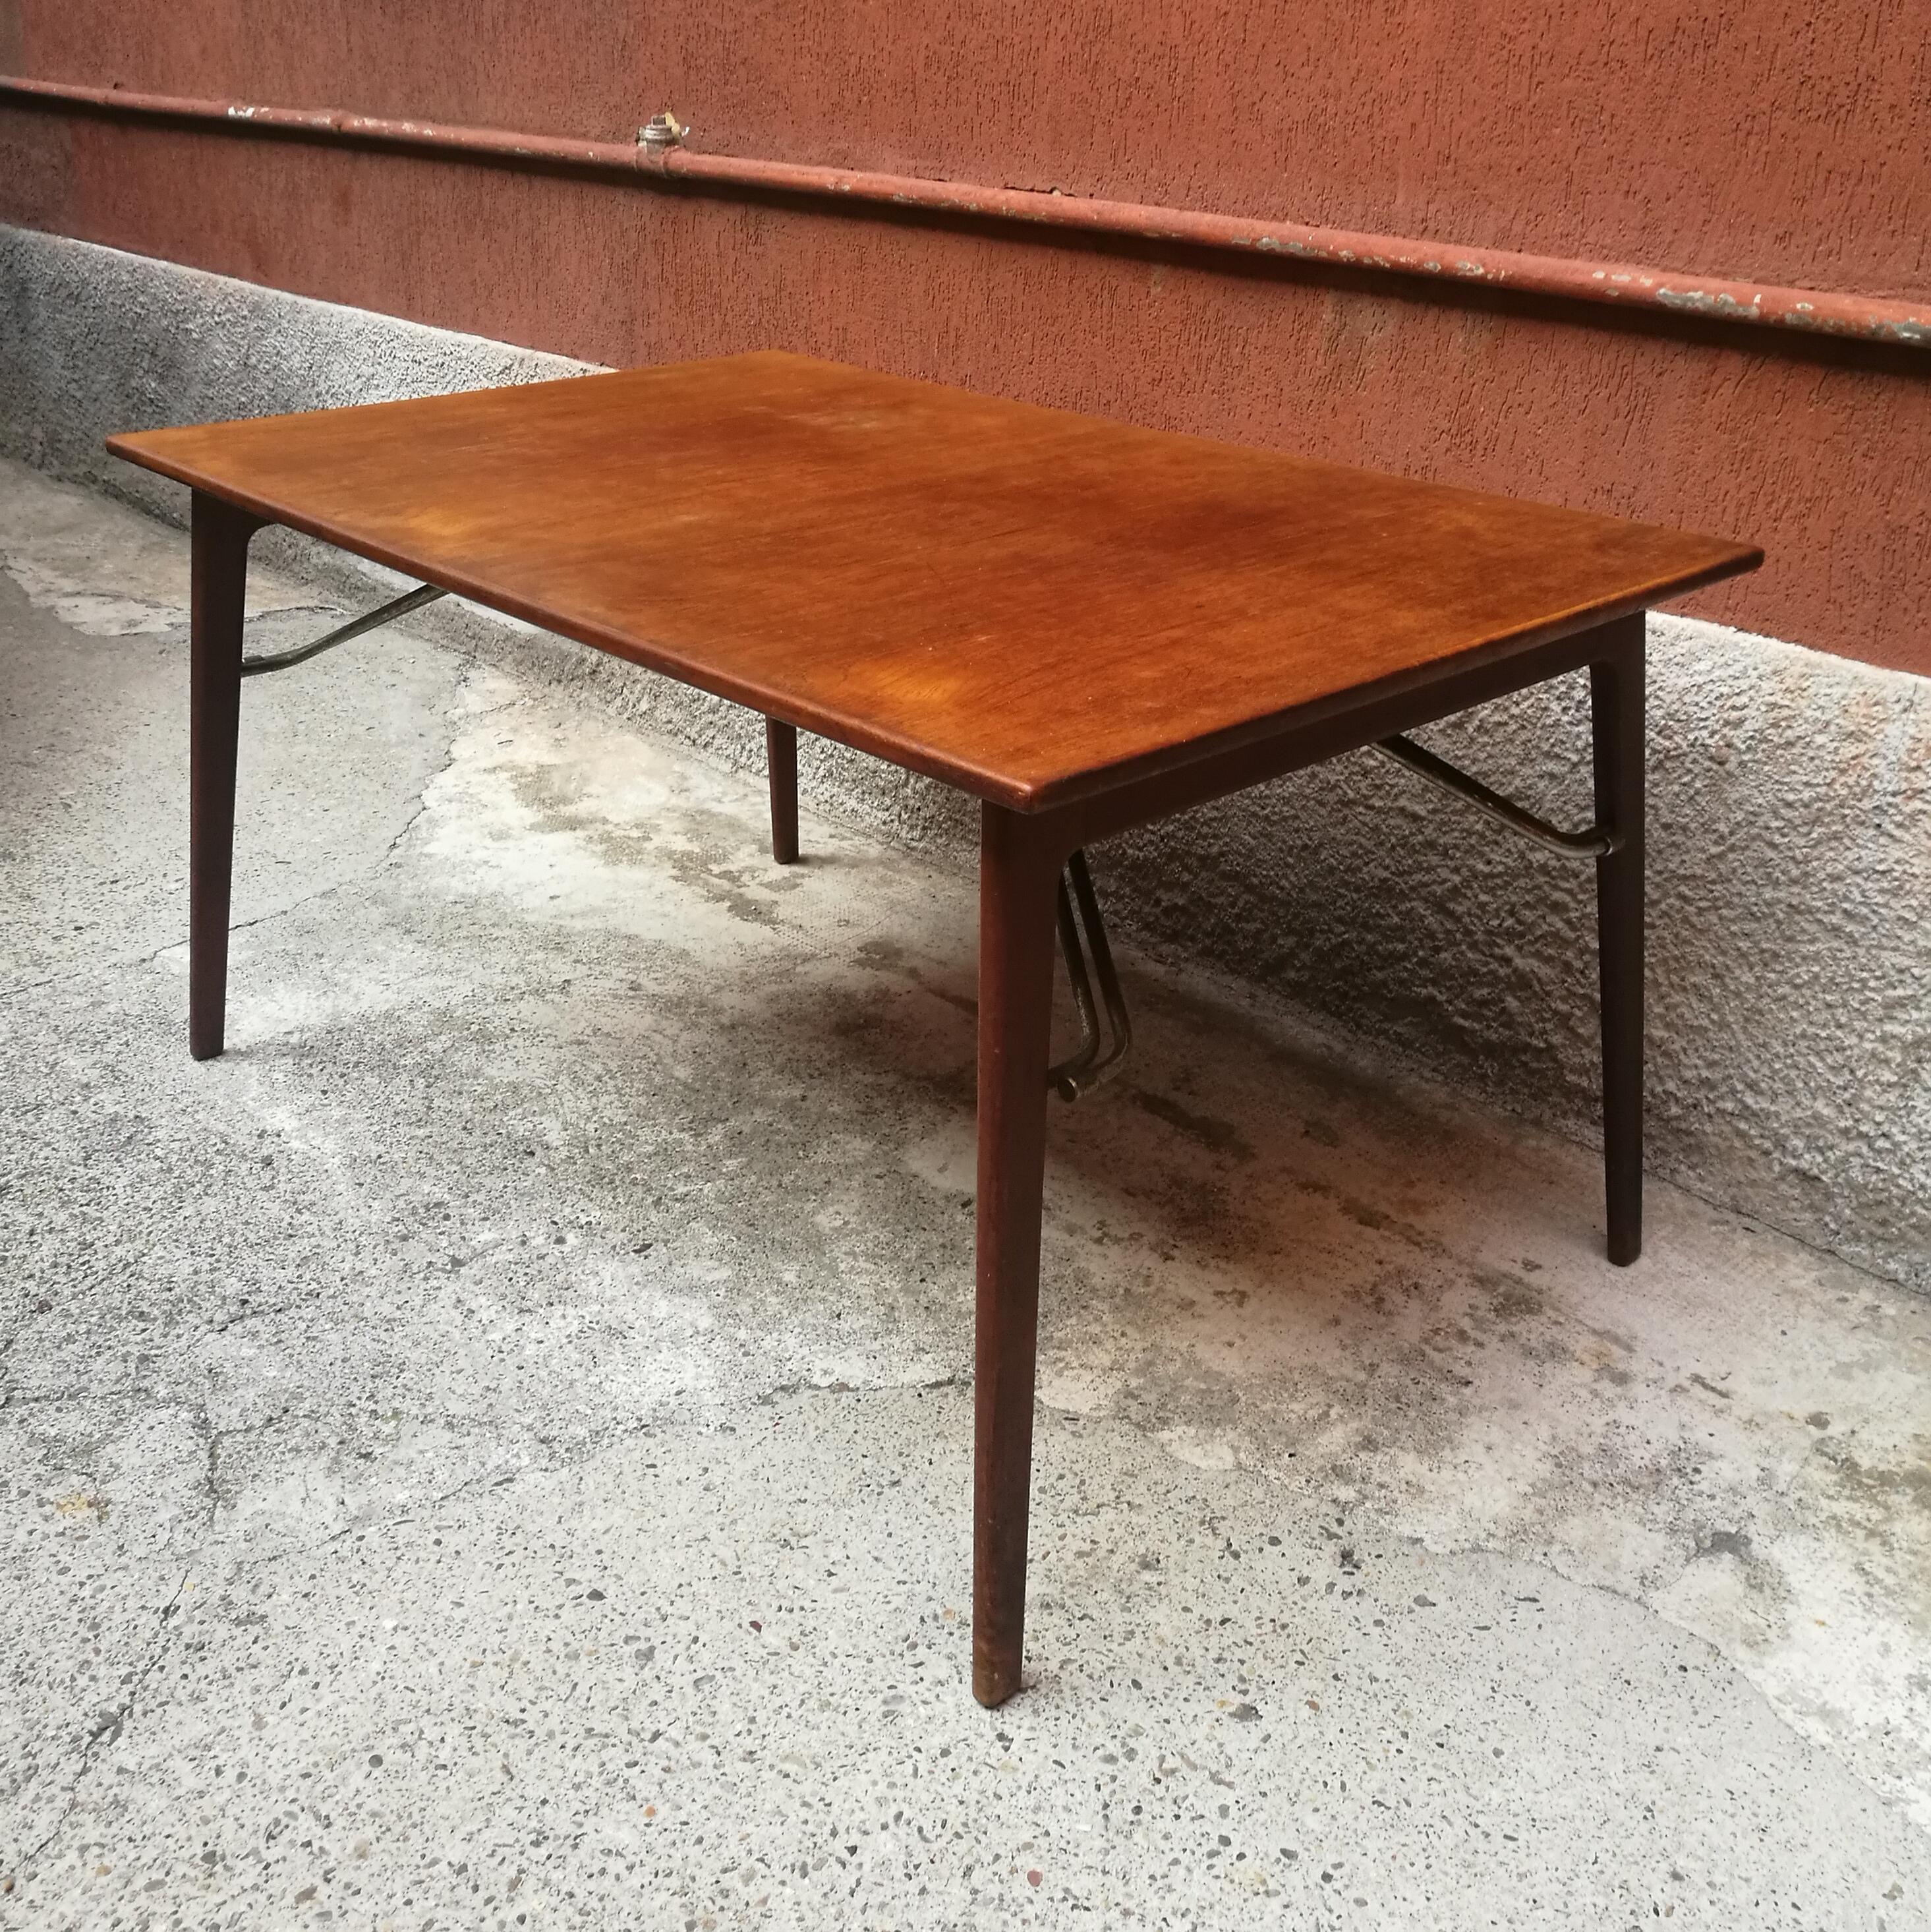 Danish teak dining table, 1960s
Danish teak dining table with double steel rod curved in the four corners that allows the closure of the legs
Vintage condition.